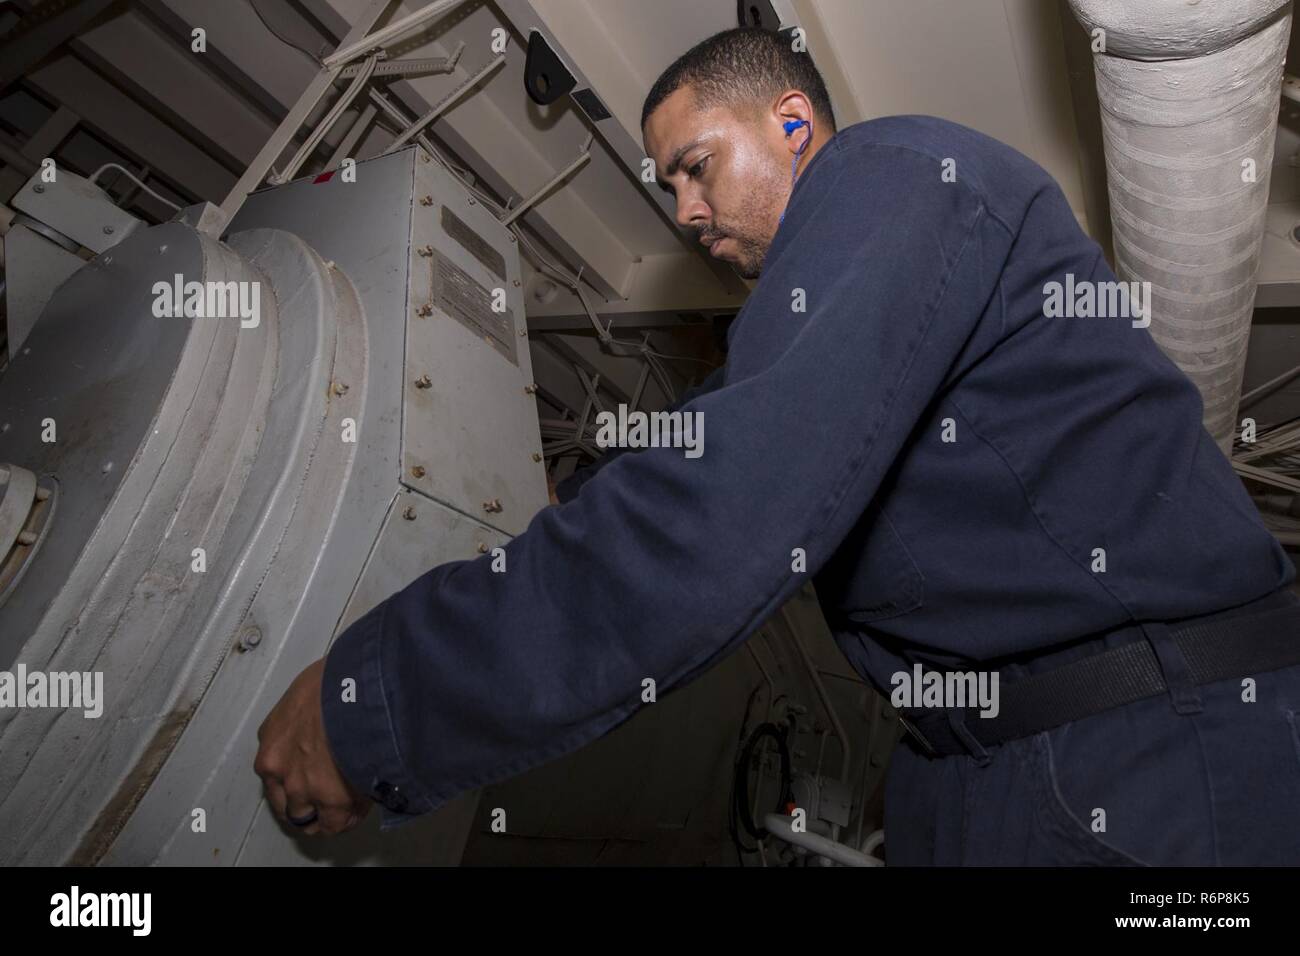 SOUTH CHINA SEA (Aug. 19, 2017) Electrician’s Mate 2nd Class Alpha Dowlen, a native of Clarksville, Tennessee, assigned to the amphibious assault ship USS America (LHA 6) Engineering department, conducts a quality assurance check on a de-energized air conditioning unit in the ship’s auxillary room. America, part of the America Amphibious Ready Group, with embarked 15th Marine Expeditionary Unit, is operating in the Indo-Asia Pacific region to strengthen partnerships and serve as a ready-response force for any type of contingency. Stock Photo